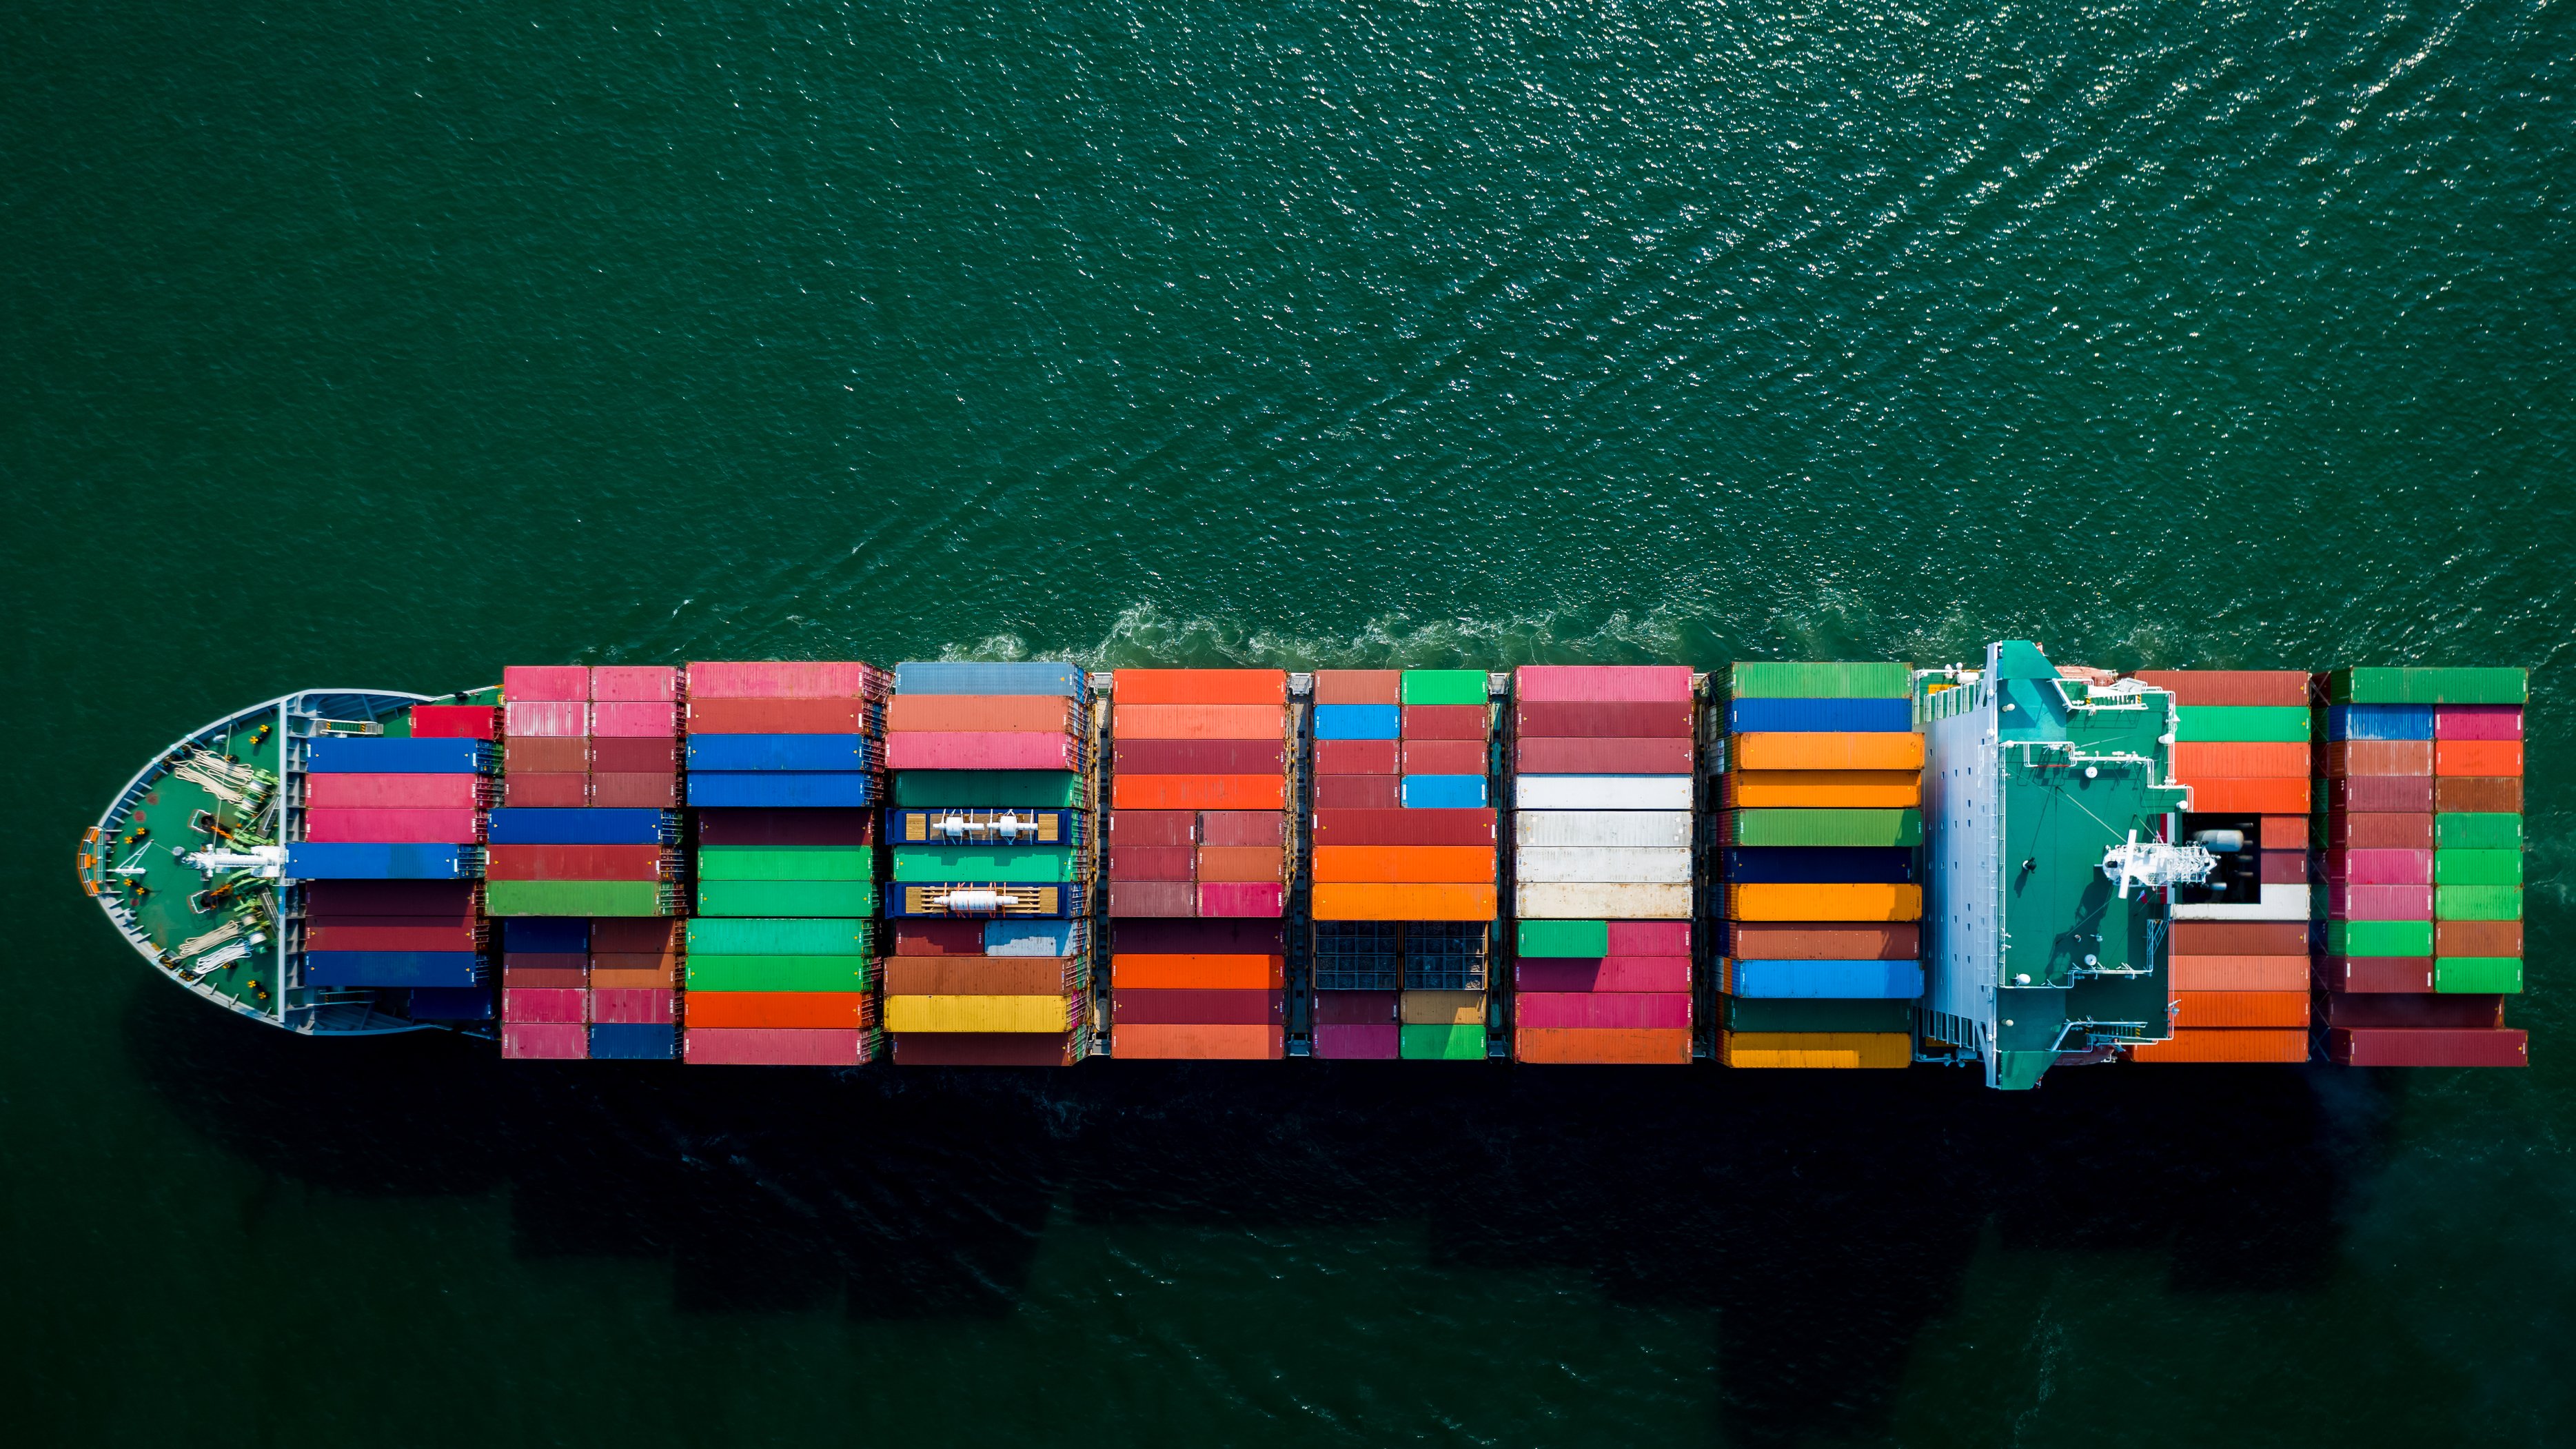 Ocean Freight Prices are finally on trend to normalize